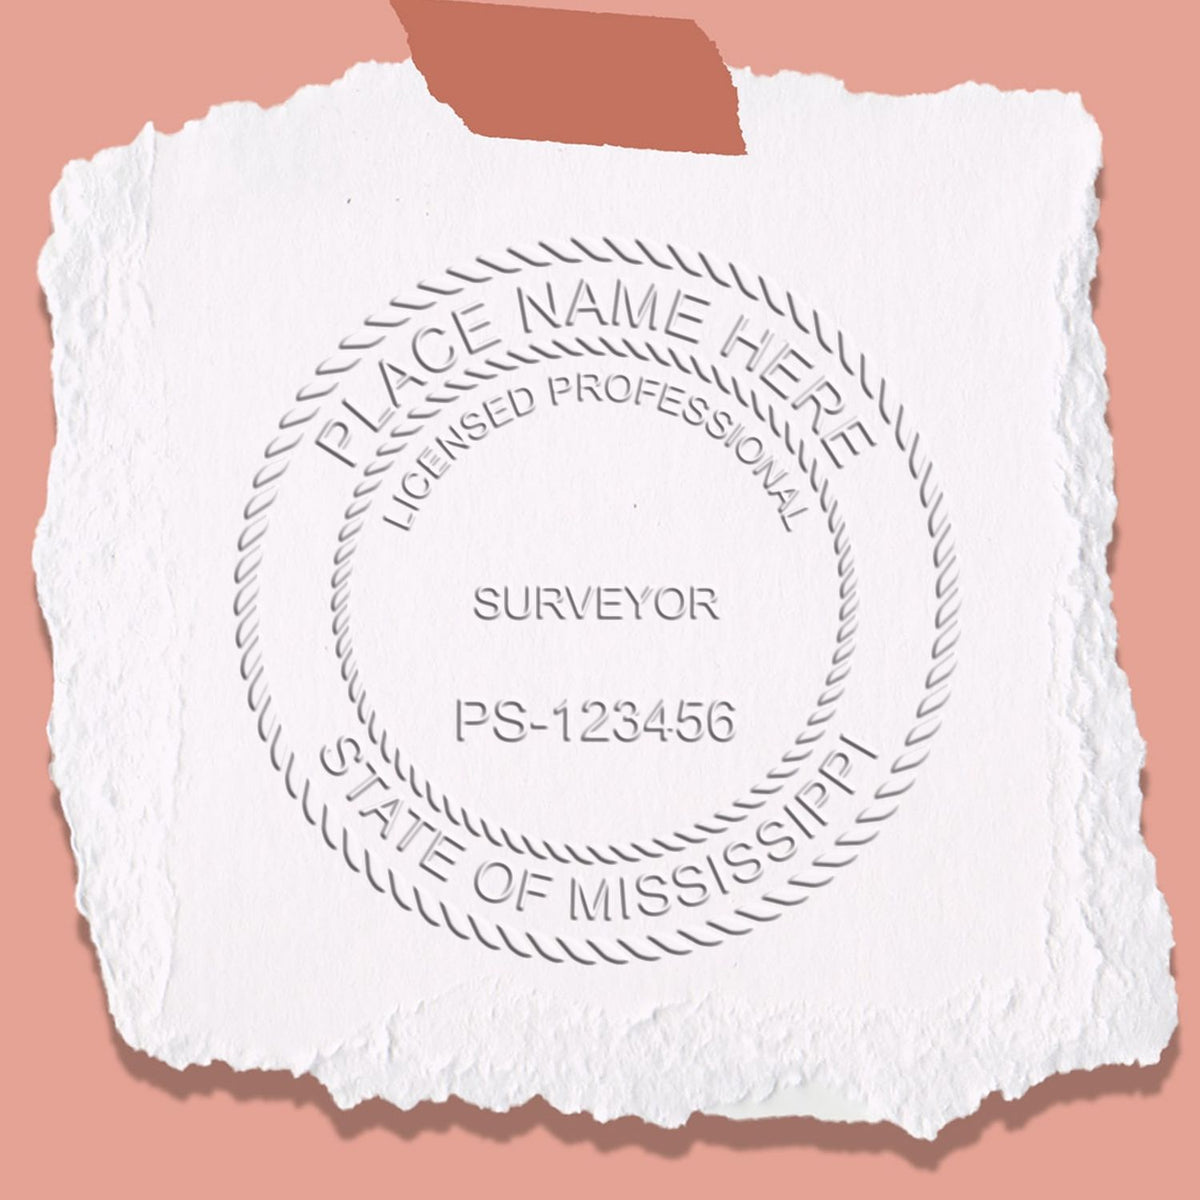 An alternative view of the Heavy Duty Cast Iron Mississippi Land Surveyor Seal Embosser stamped on a sheet of paper showing the image in use